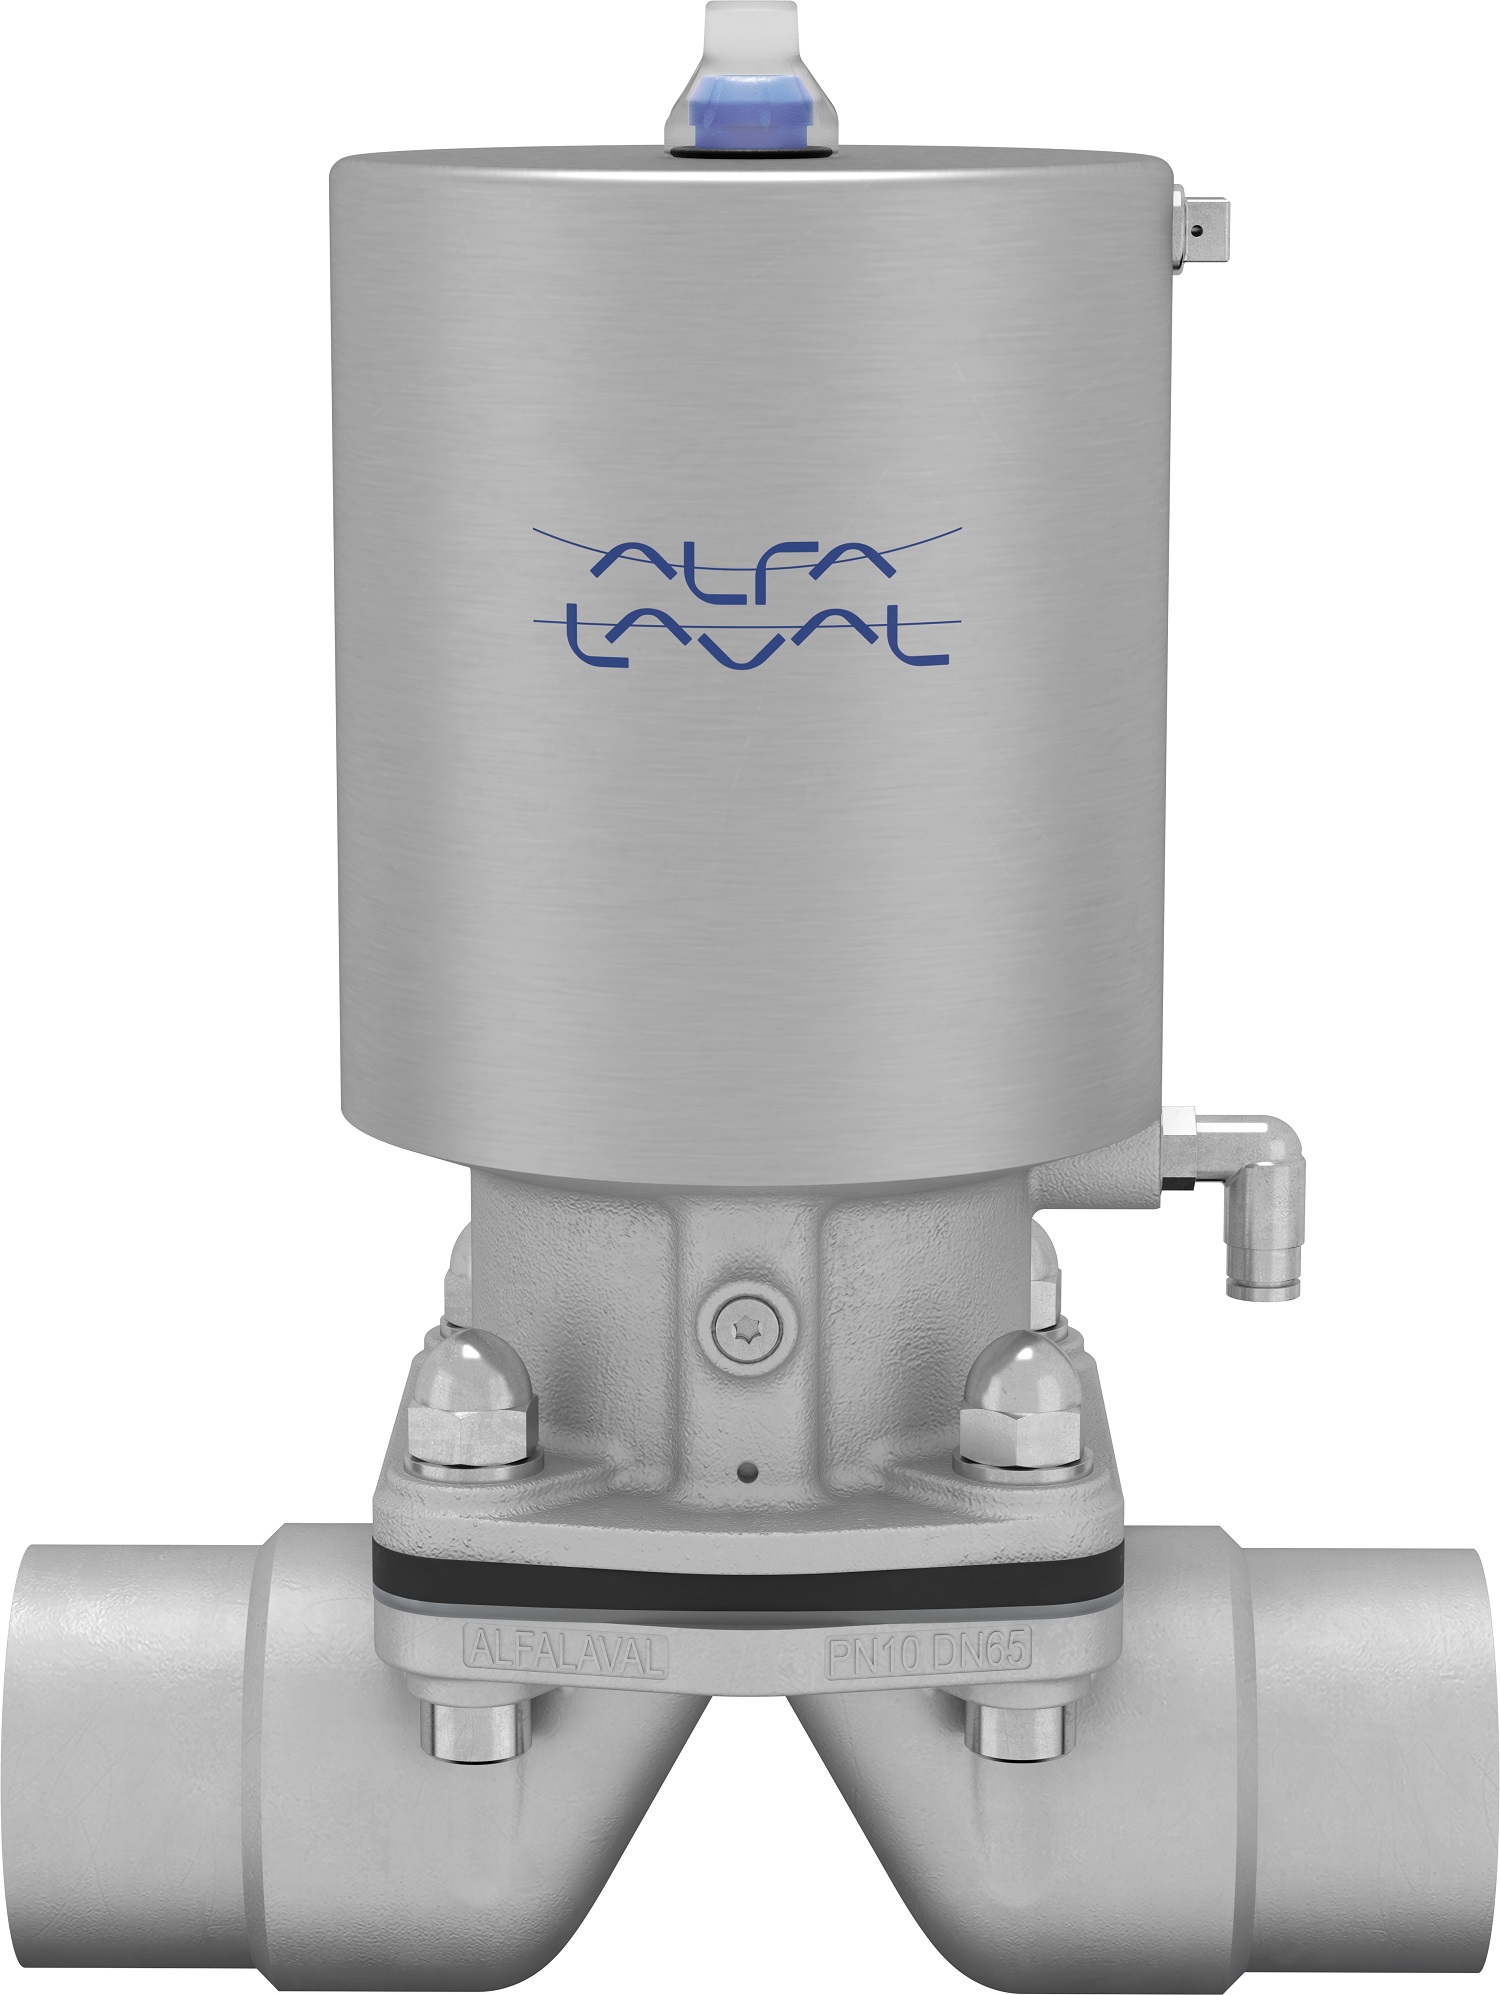 The new diaphragm valve range is ATEX-compliant, has slimmer stainless-steel actuators and lightweight cast valve bodies.